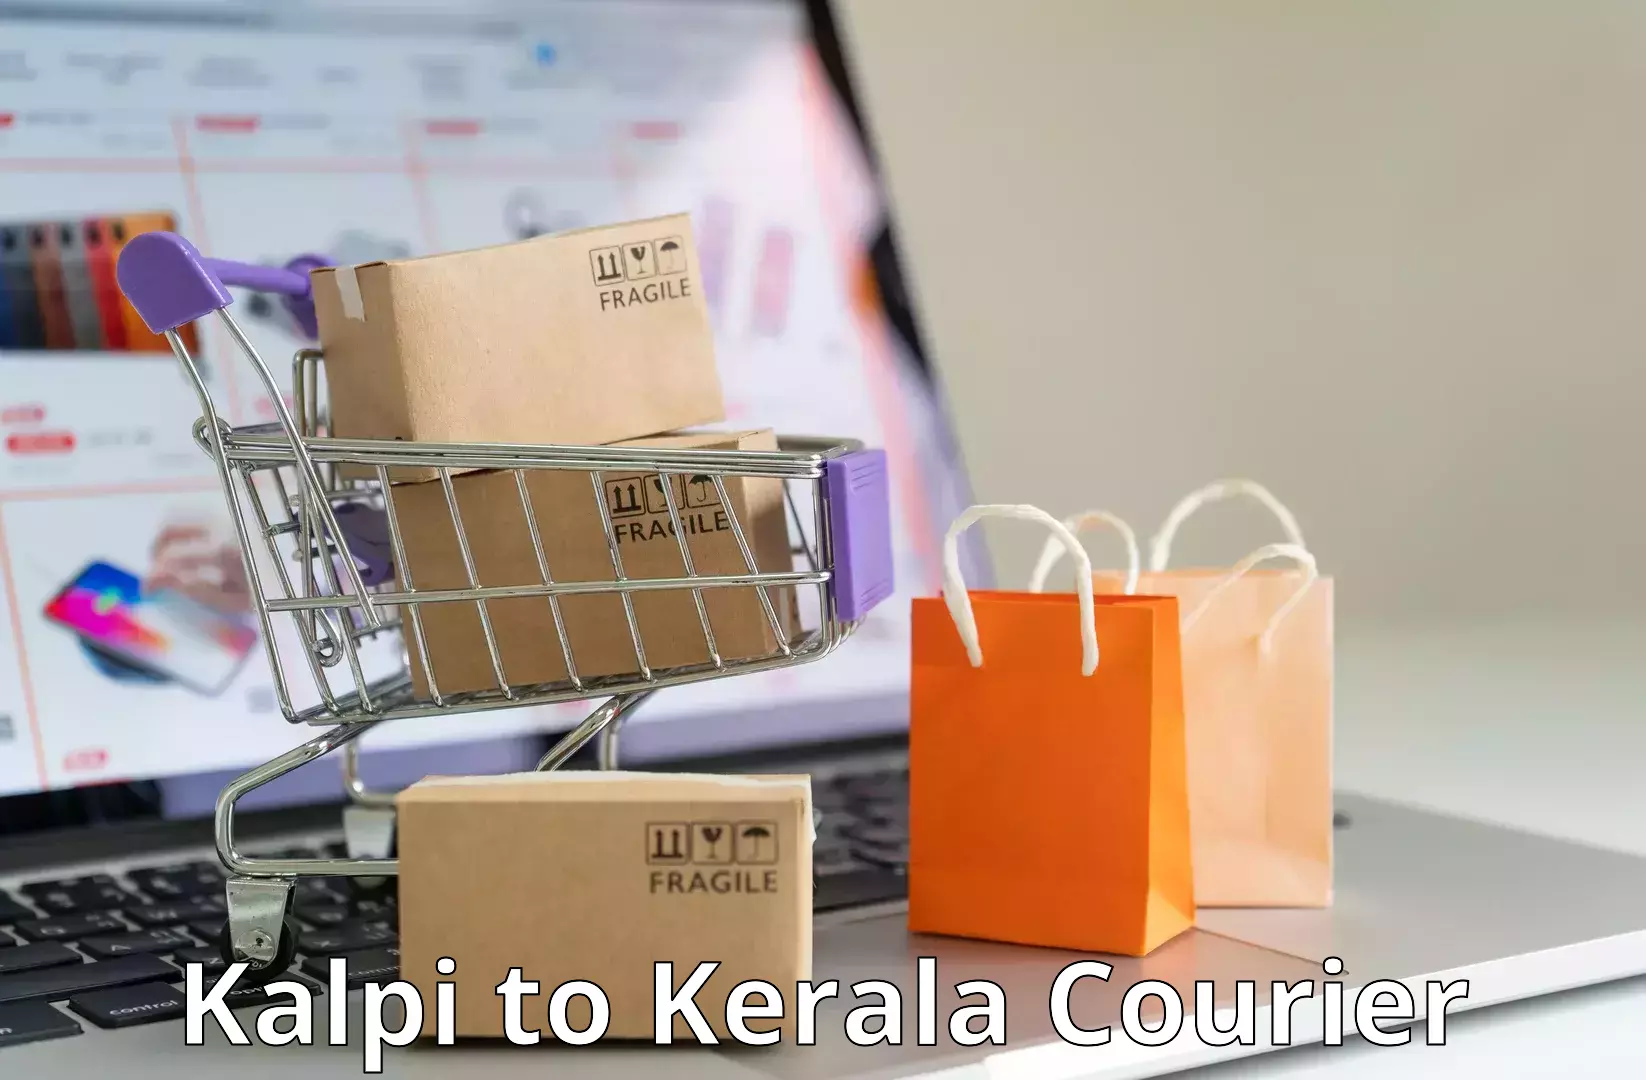 Heavy parcel delivery in Kalpi to Kerala